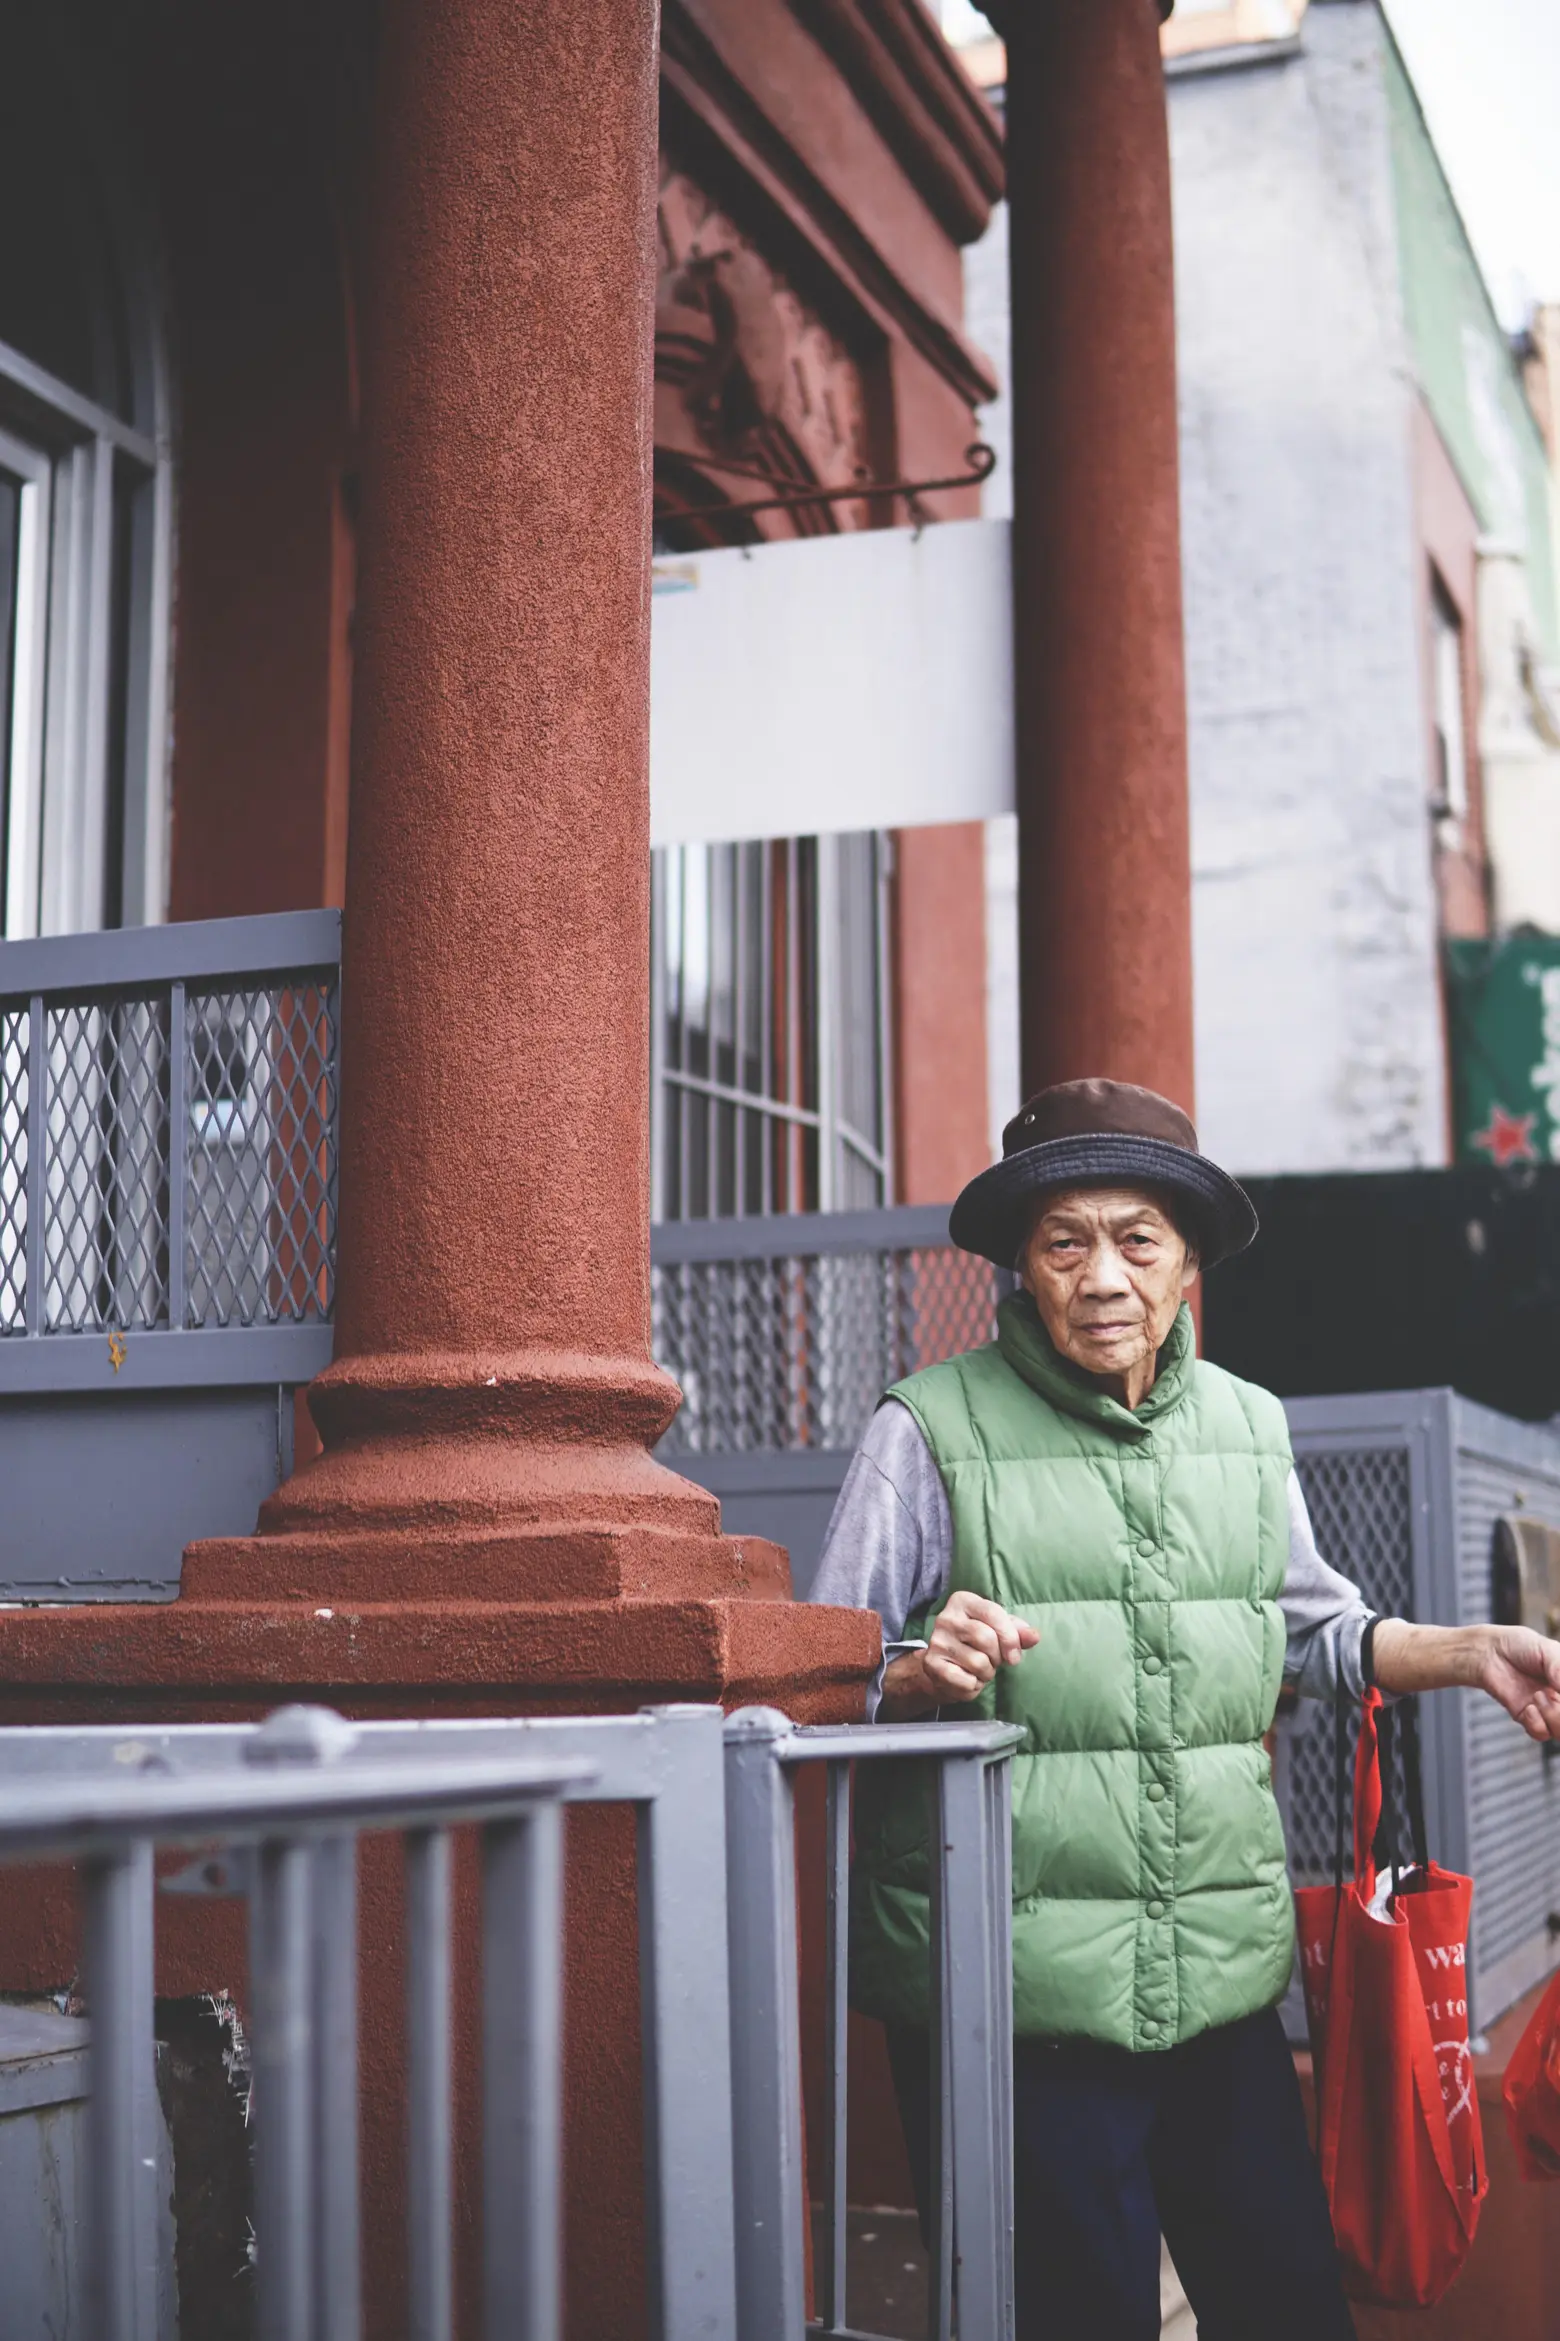 Chinatown photography, Chaz Langley